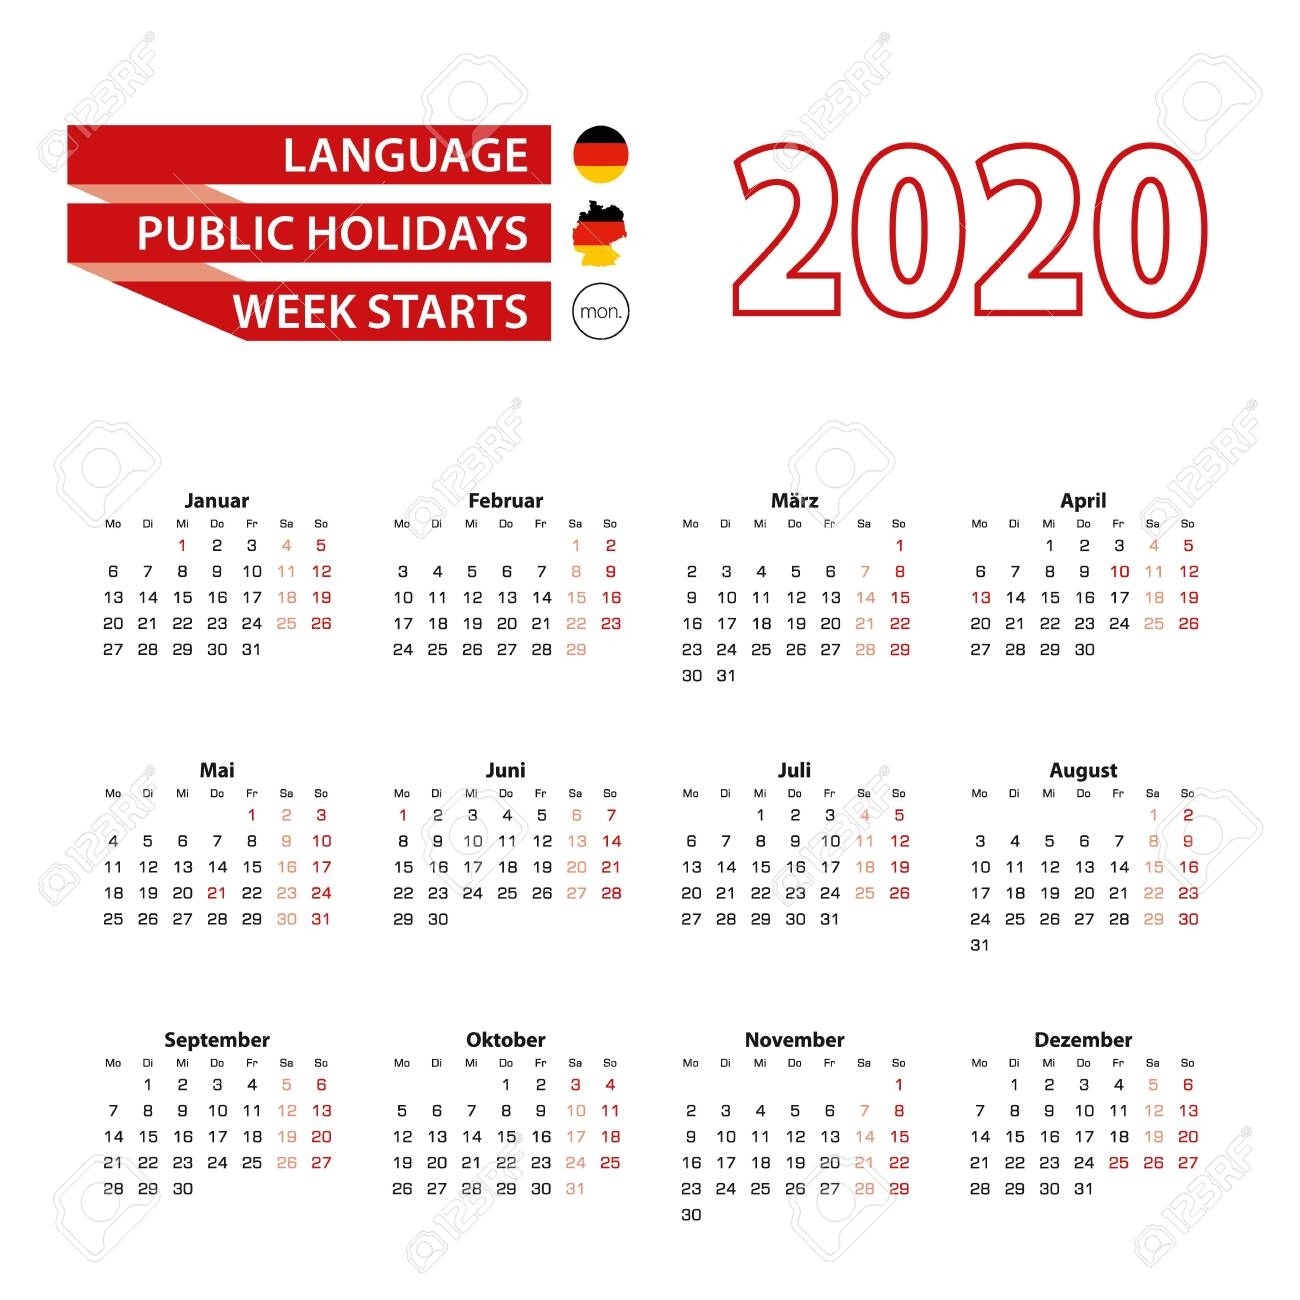 Calendar 2020 In Germany Language With Public Holidays The Country..